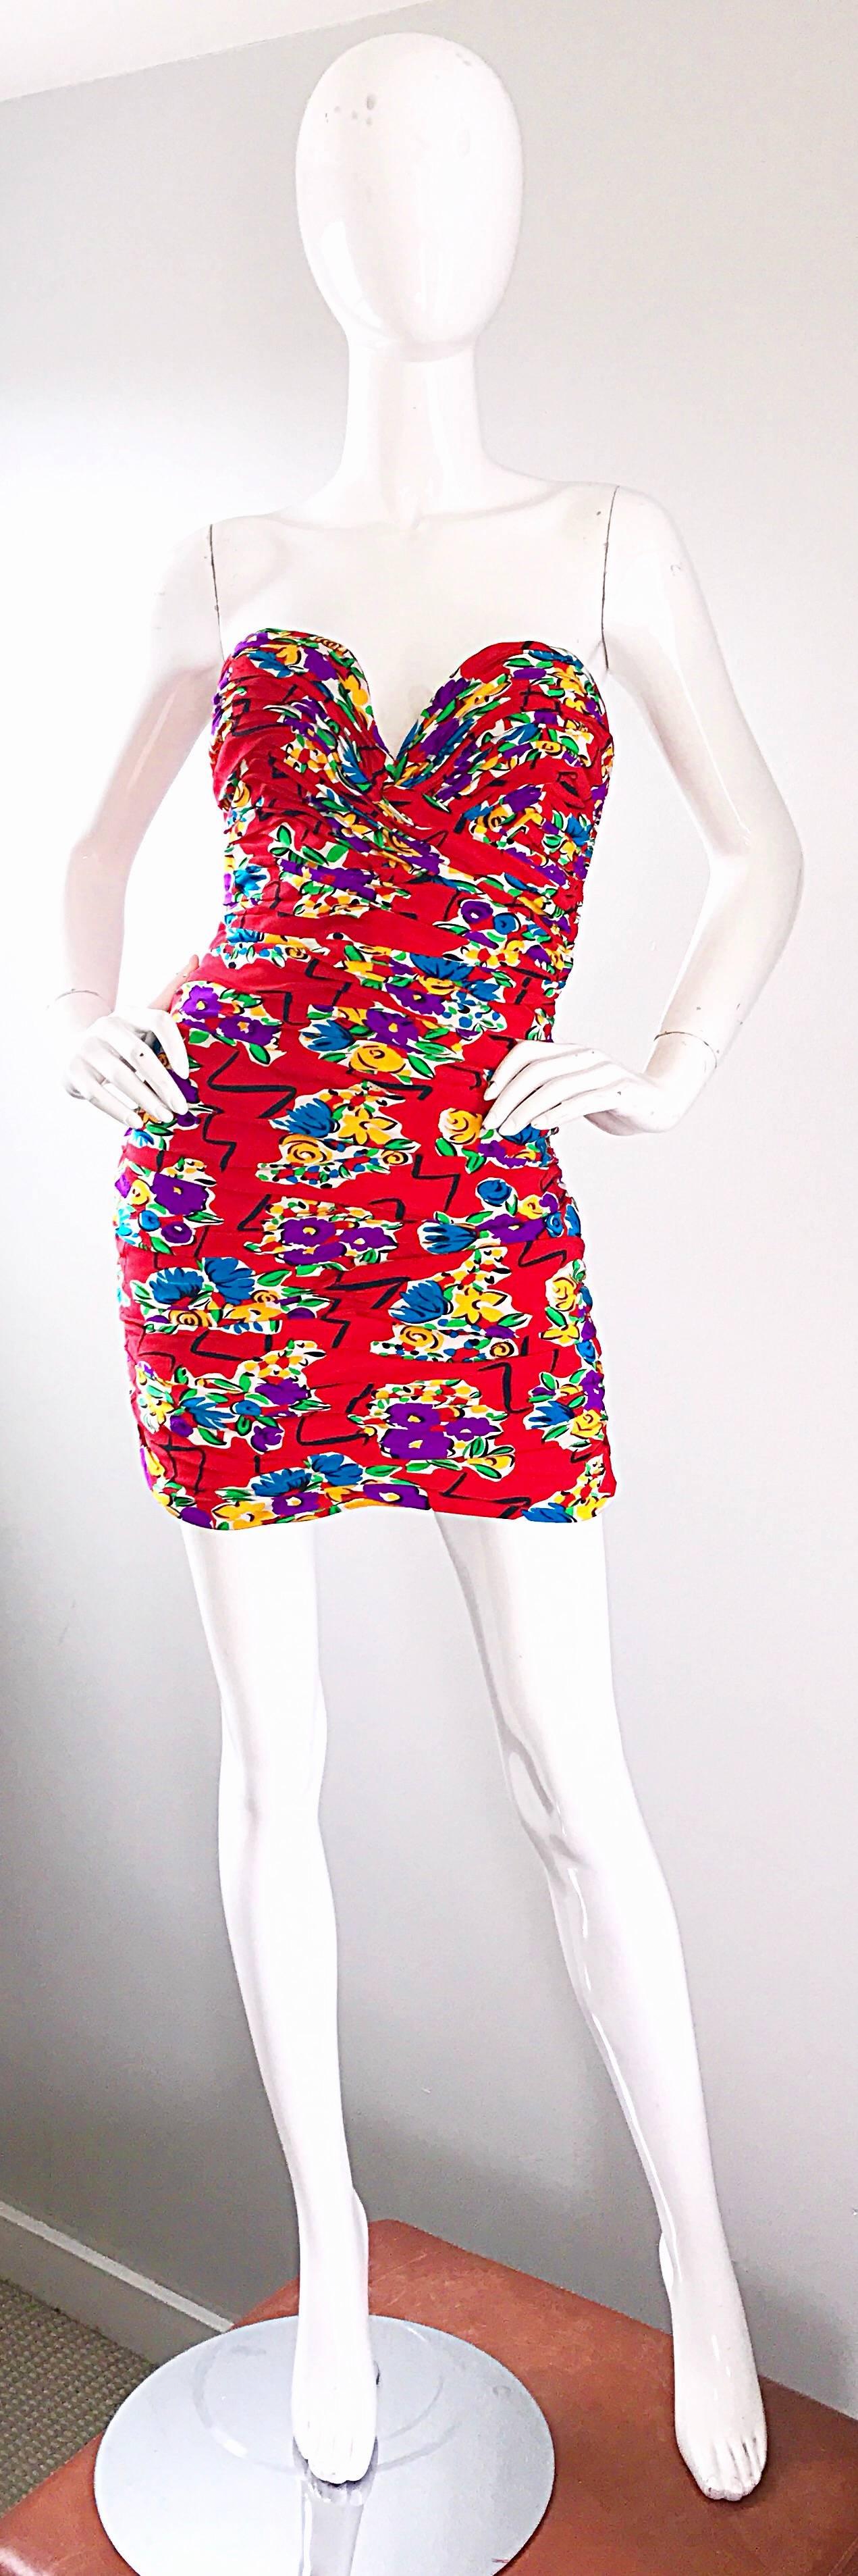 Sensational vintage Mid 80s VICKY TIEL COUTURE red silk strapless mini cocktail dress! Features a vibrant lipstick red background, with purple, blue, yellow and green flowers throughout. Black geometric shapes intertwined between the flowers.